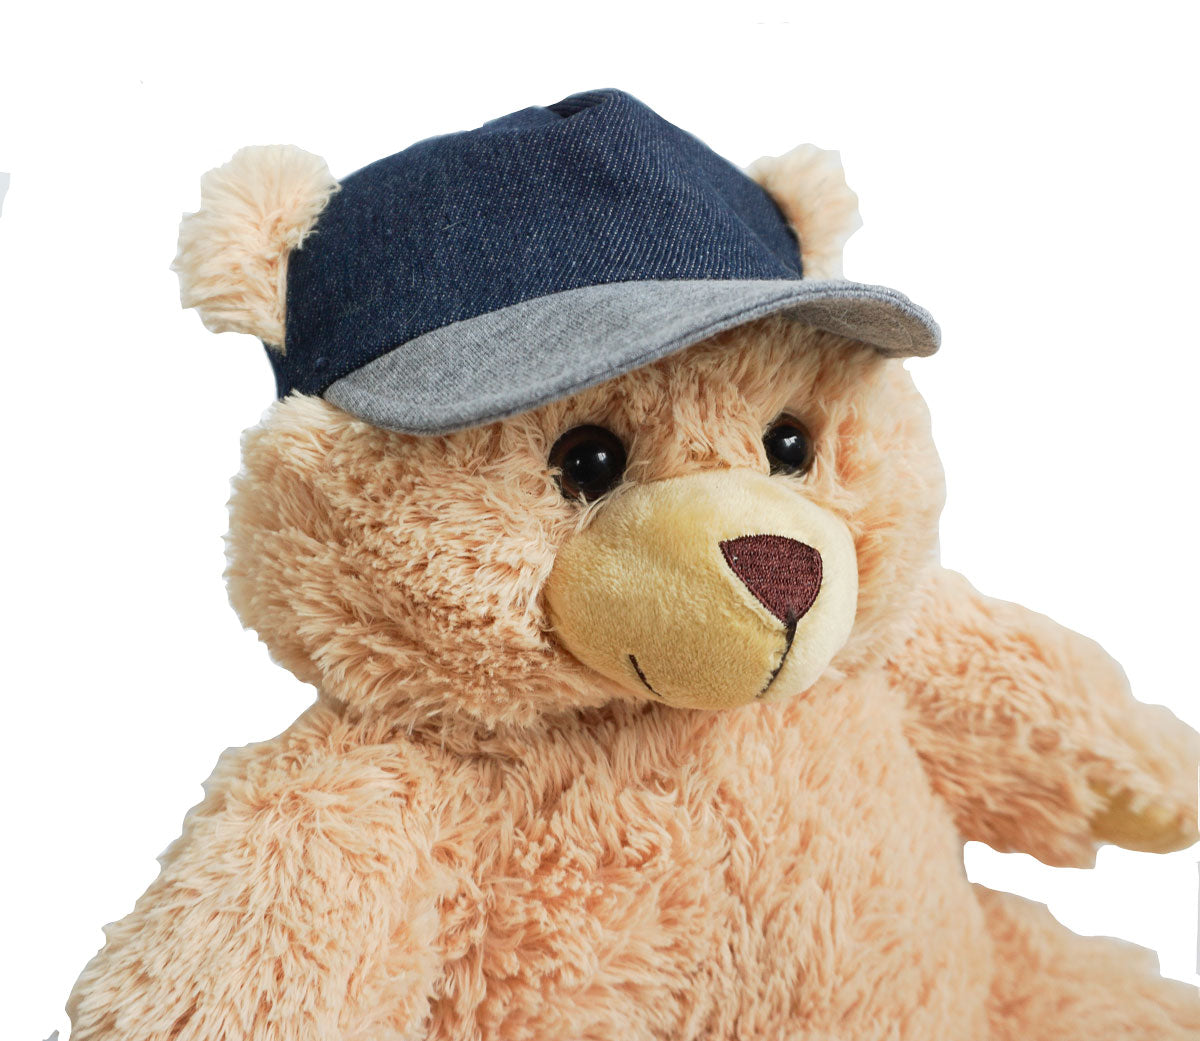 FFCC Clothes - Blue and Grey Baseball Cap for 16" Stuffed Animal